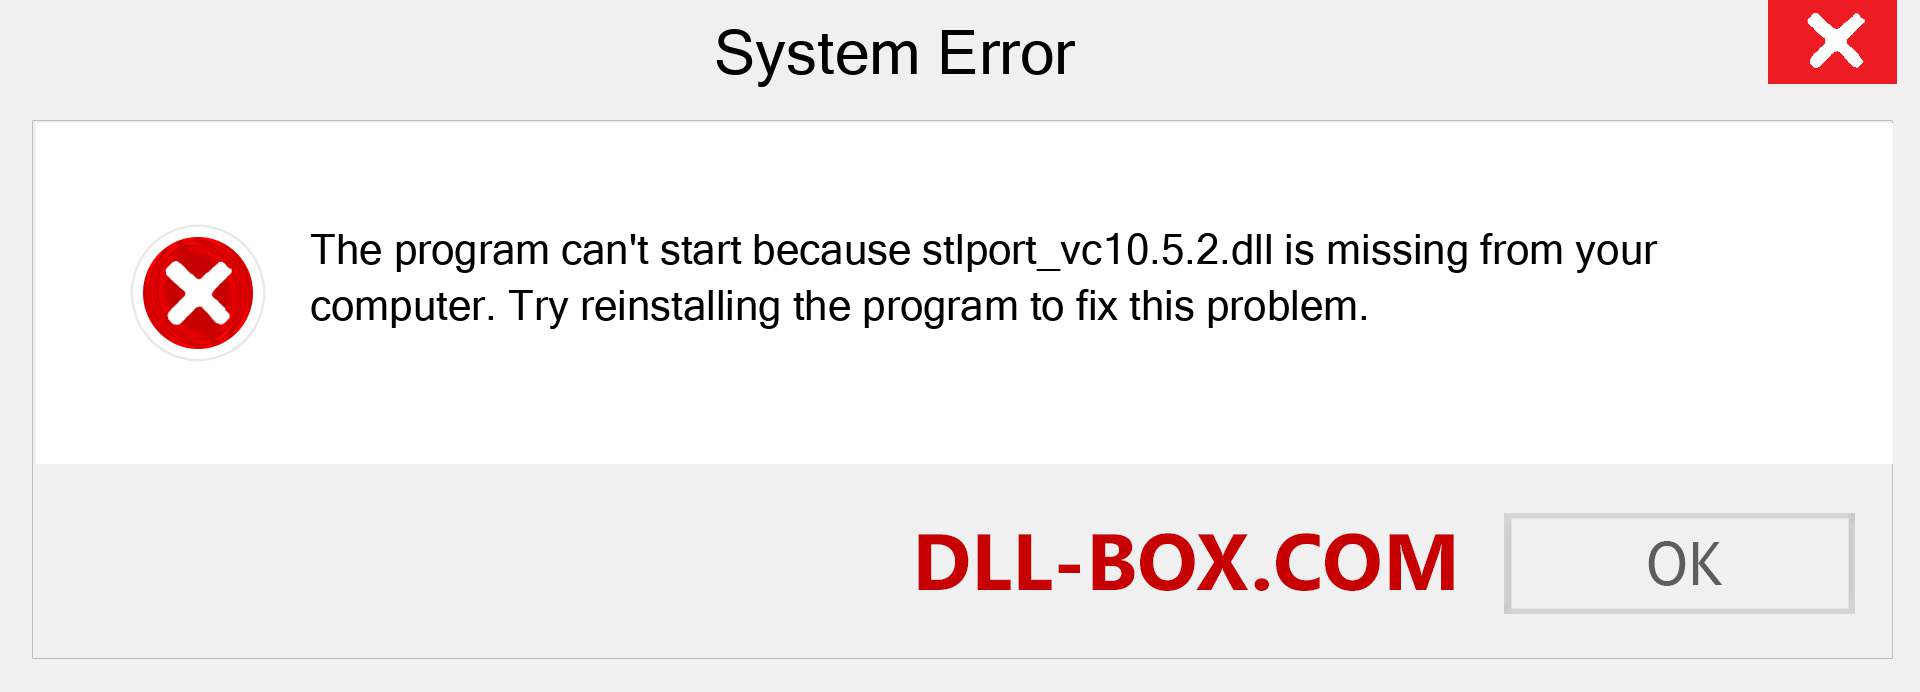  stlport_vc10.5.2.dll file is missing?. Download for Windows 7, 8, 10 - Fix  stlport_vc10.5.2 dll Missing Error on Windows, photos, images